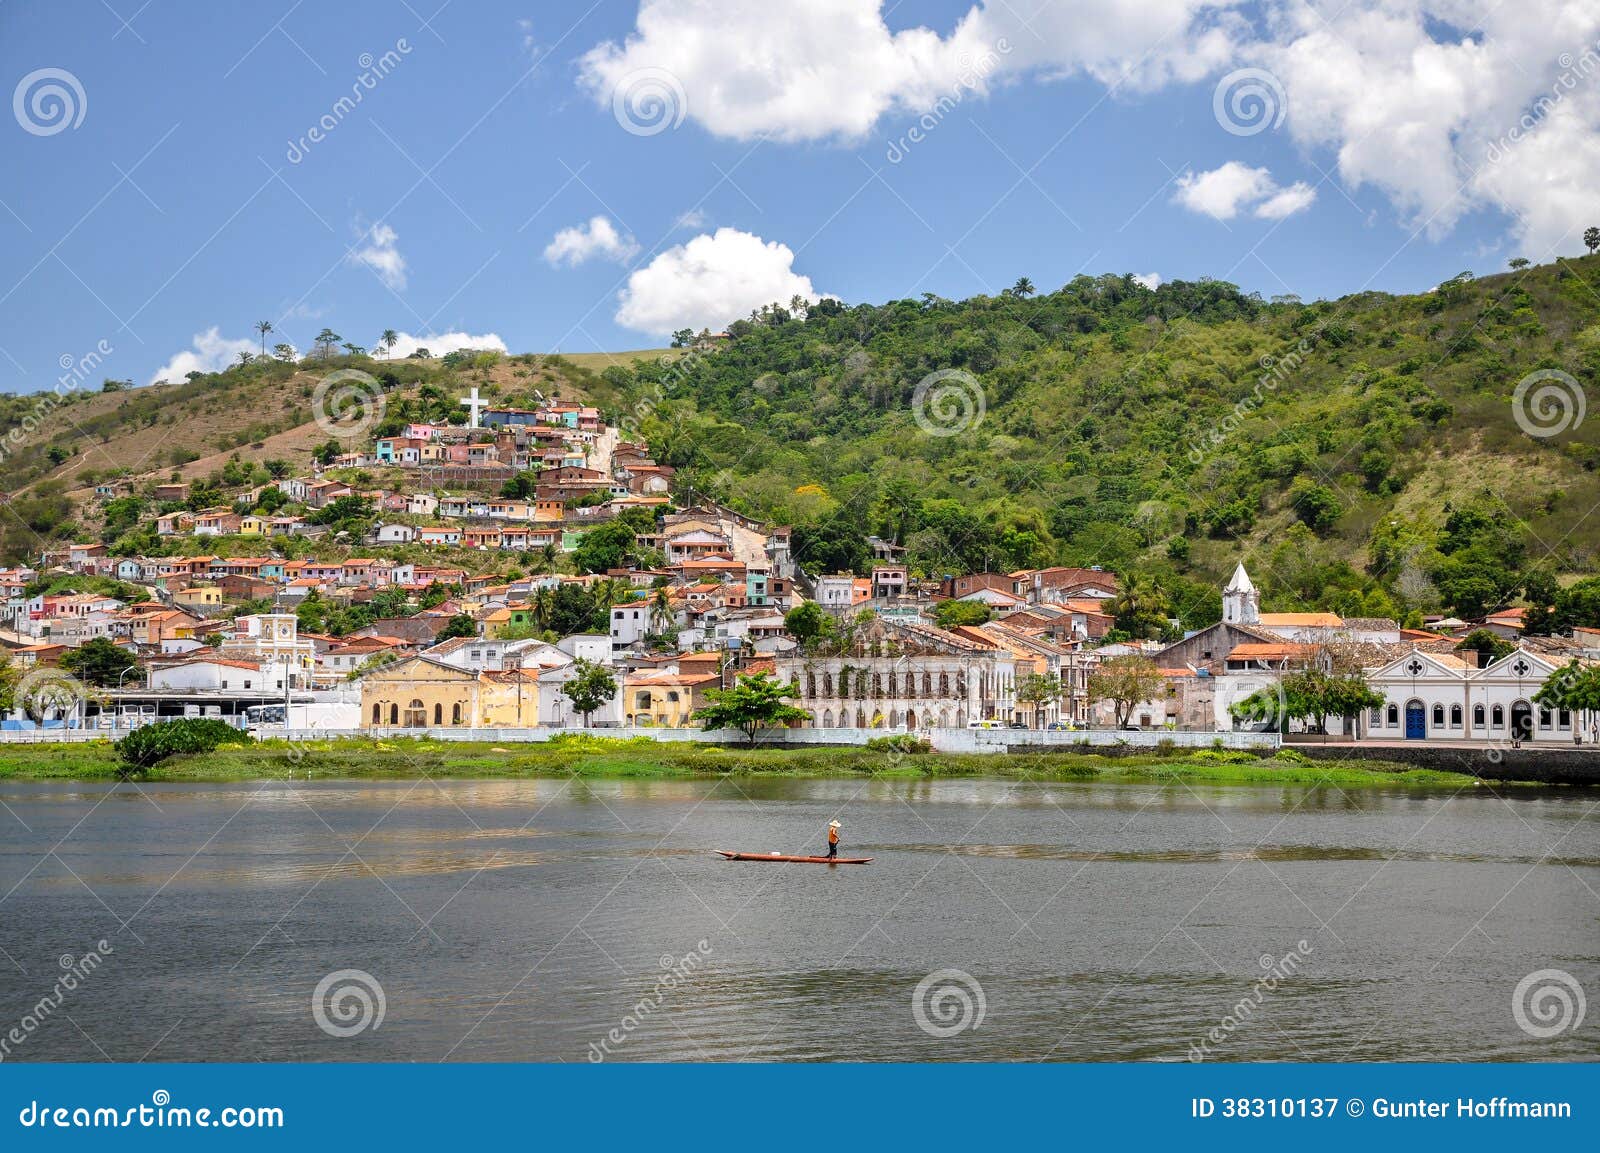 small boat in cachoeira (brazil)